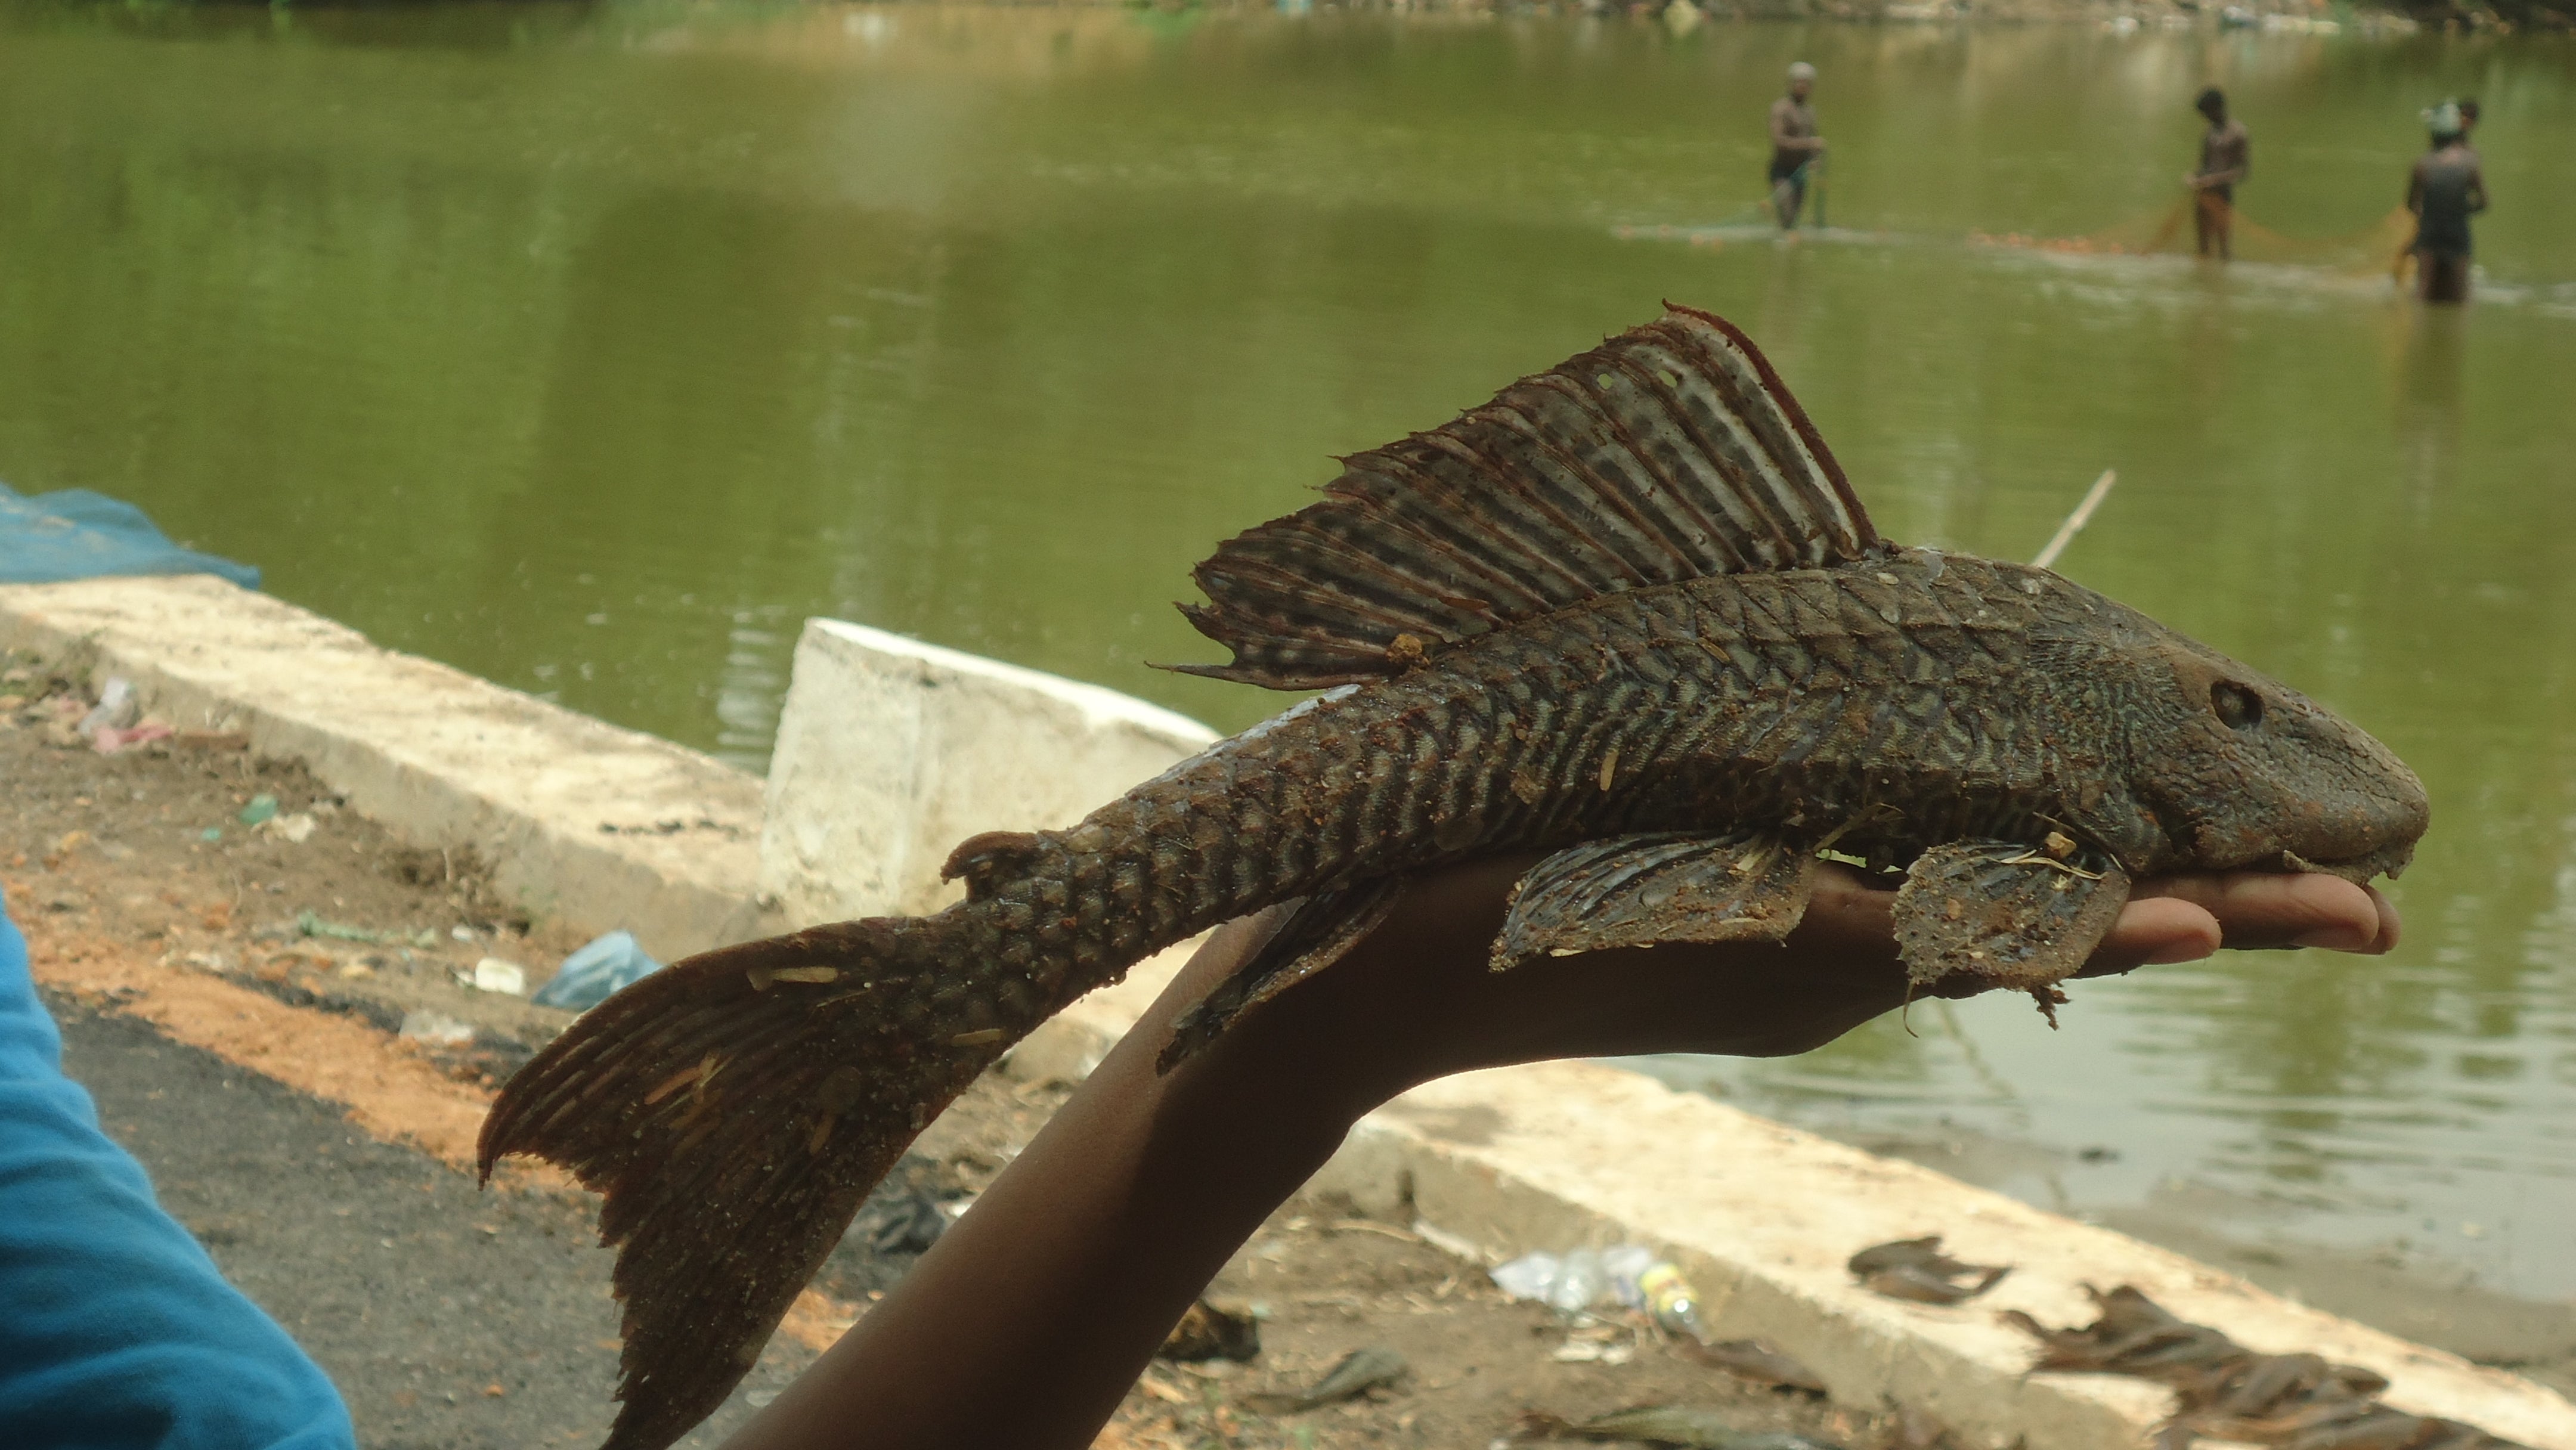 A discarded suckermouth catfish in Tamil Nadu, India